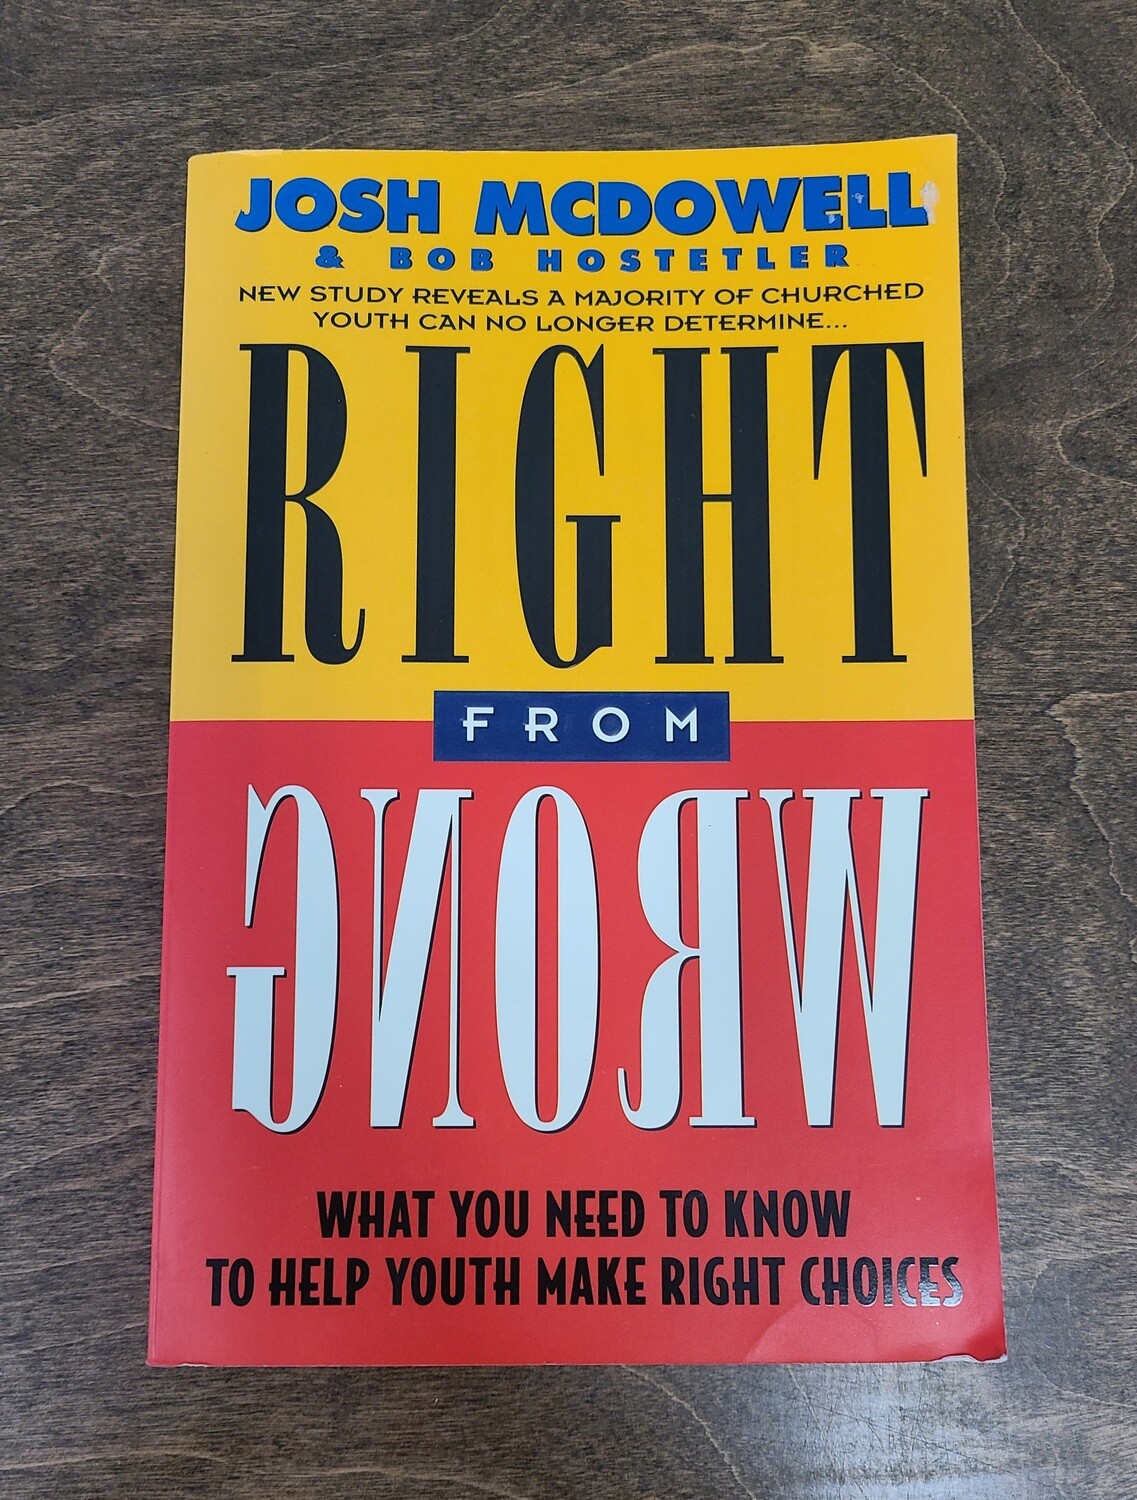 Right from Wrong by Josh McDowell and Bob Hostetler